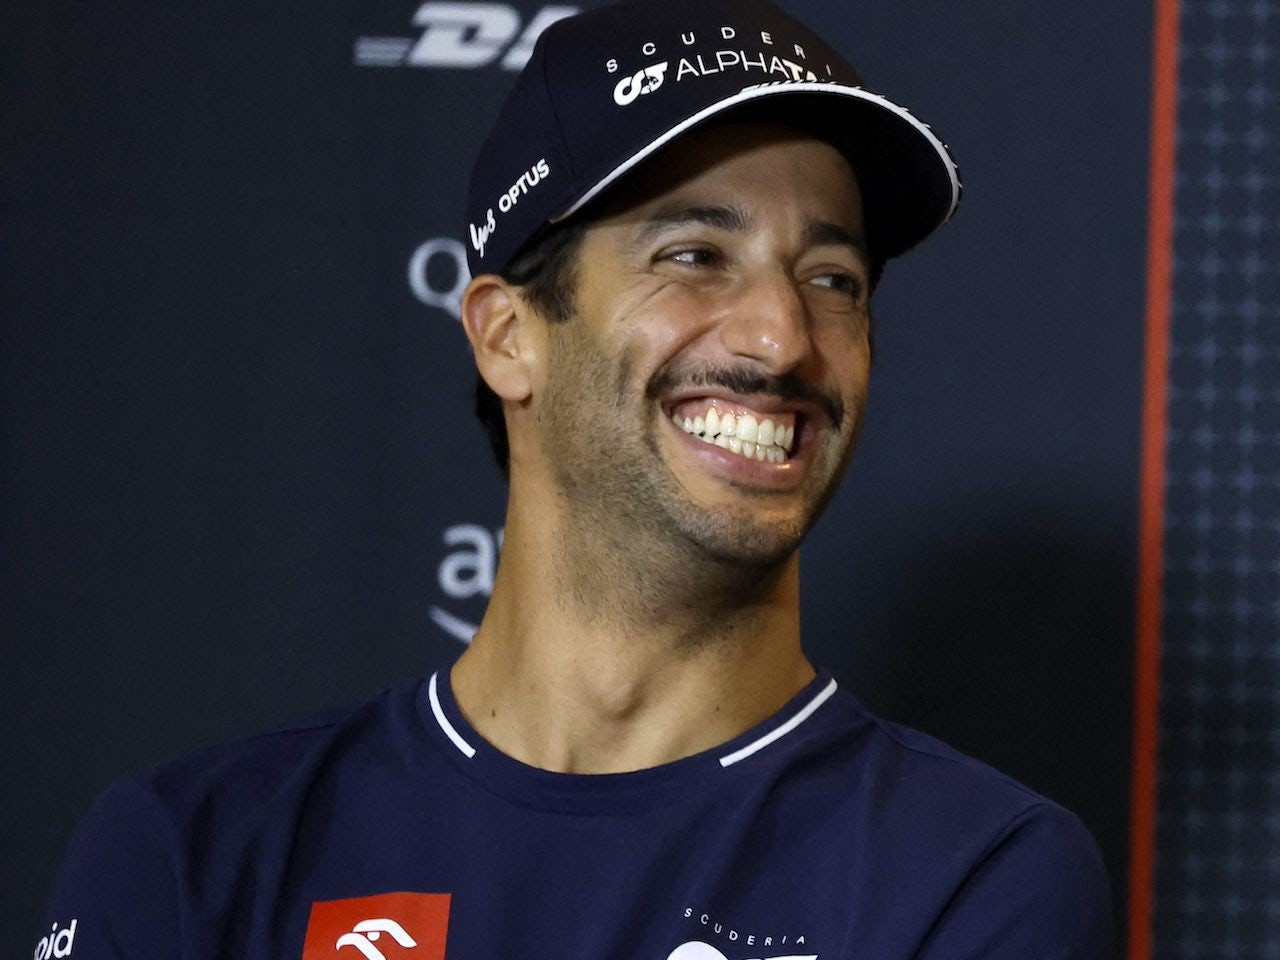 Changing guard: Tsunoda's rise and Ricciardo's likely F1 exit